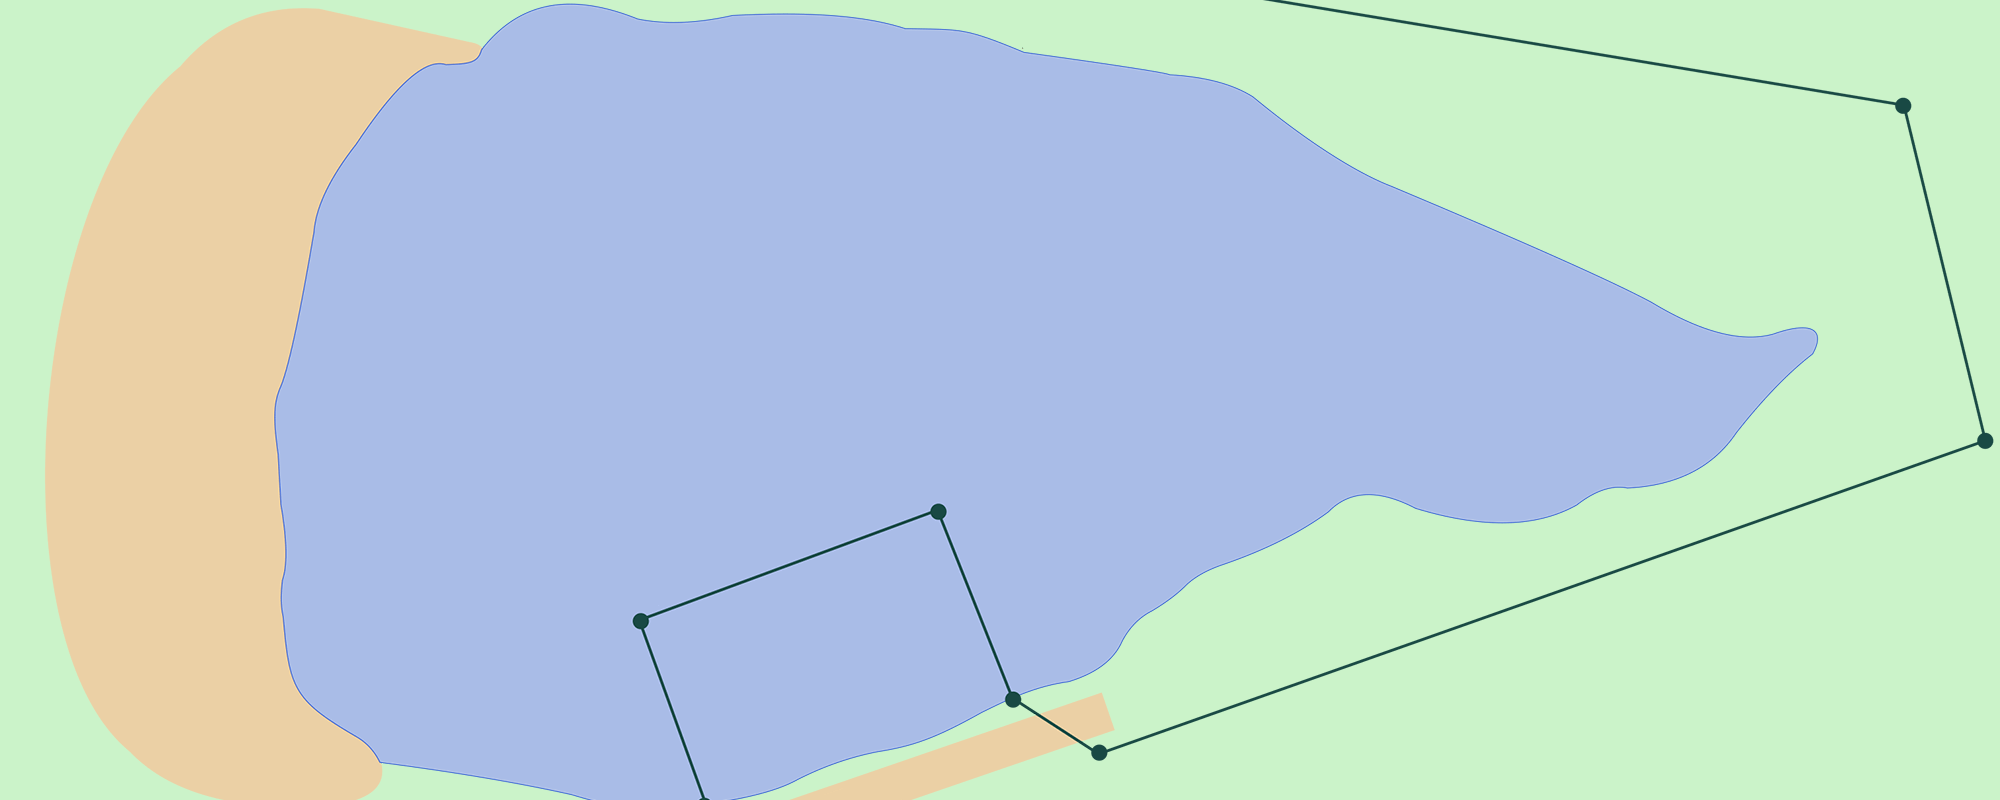 Diagram of water access point in pond fence